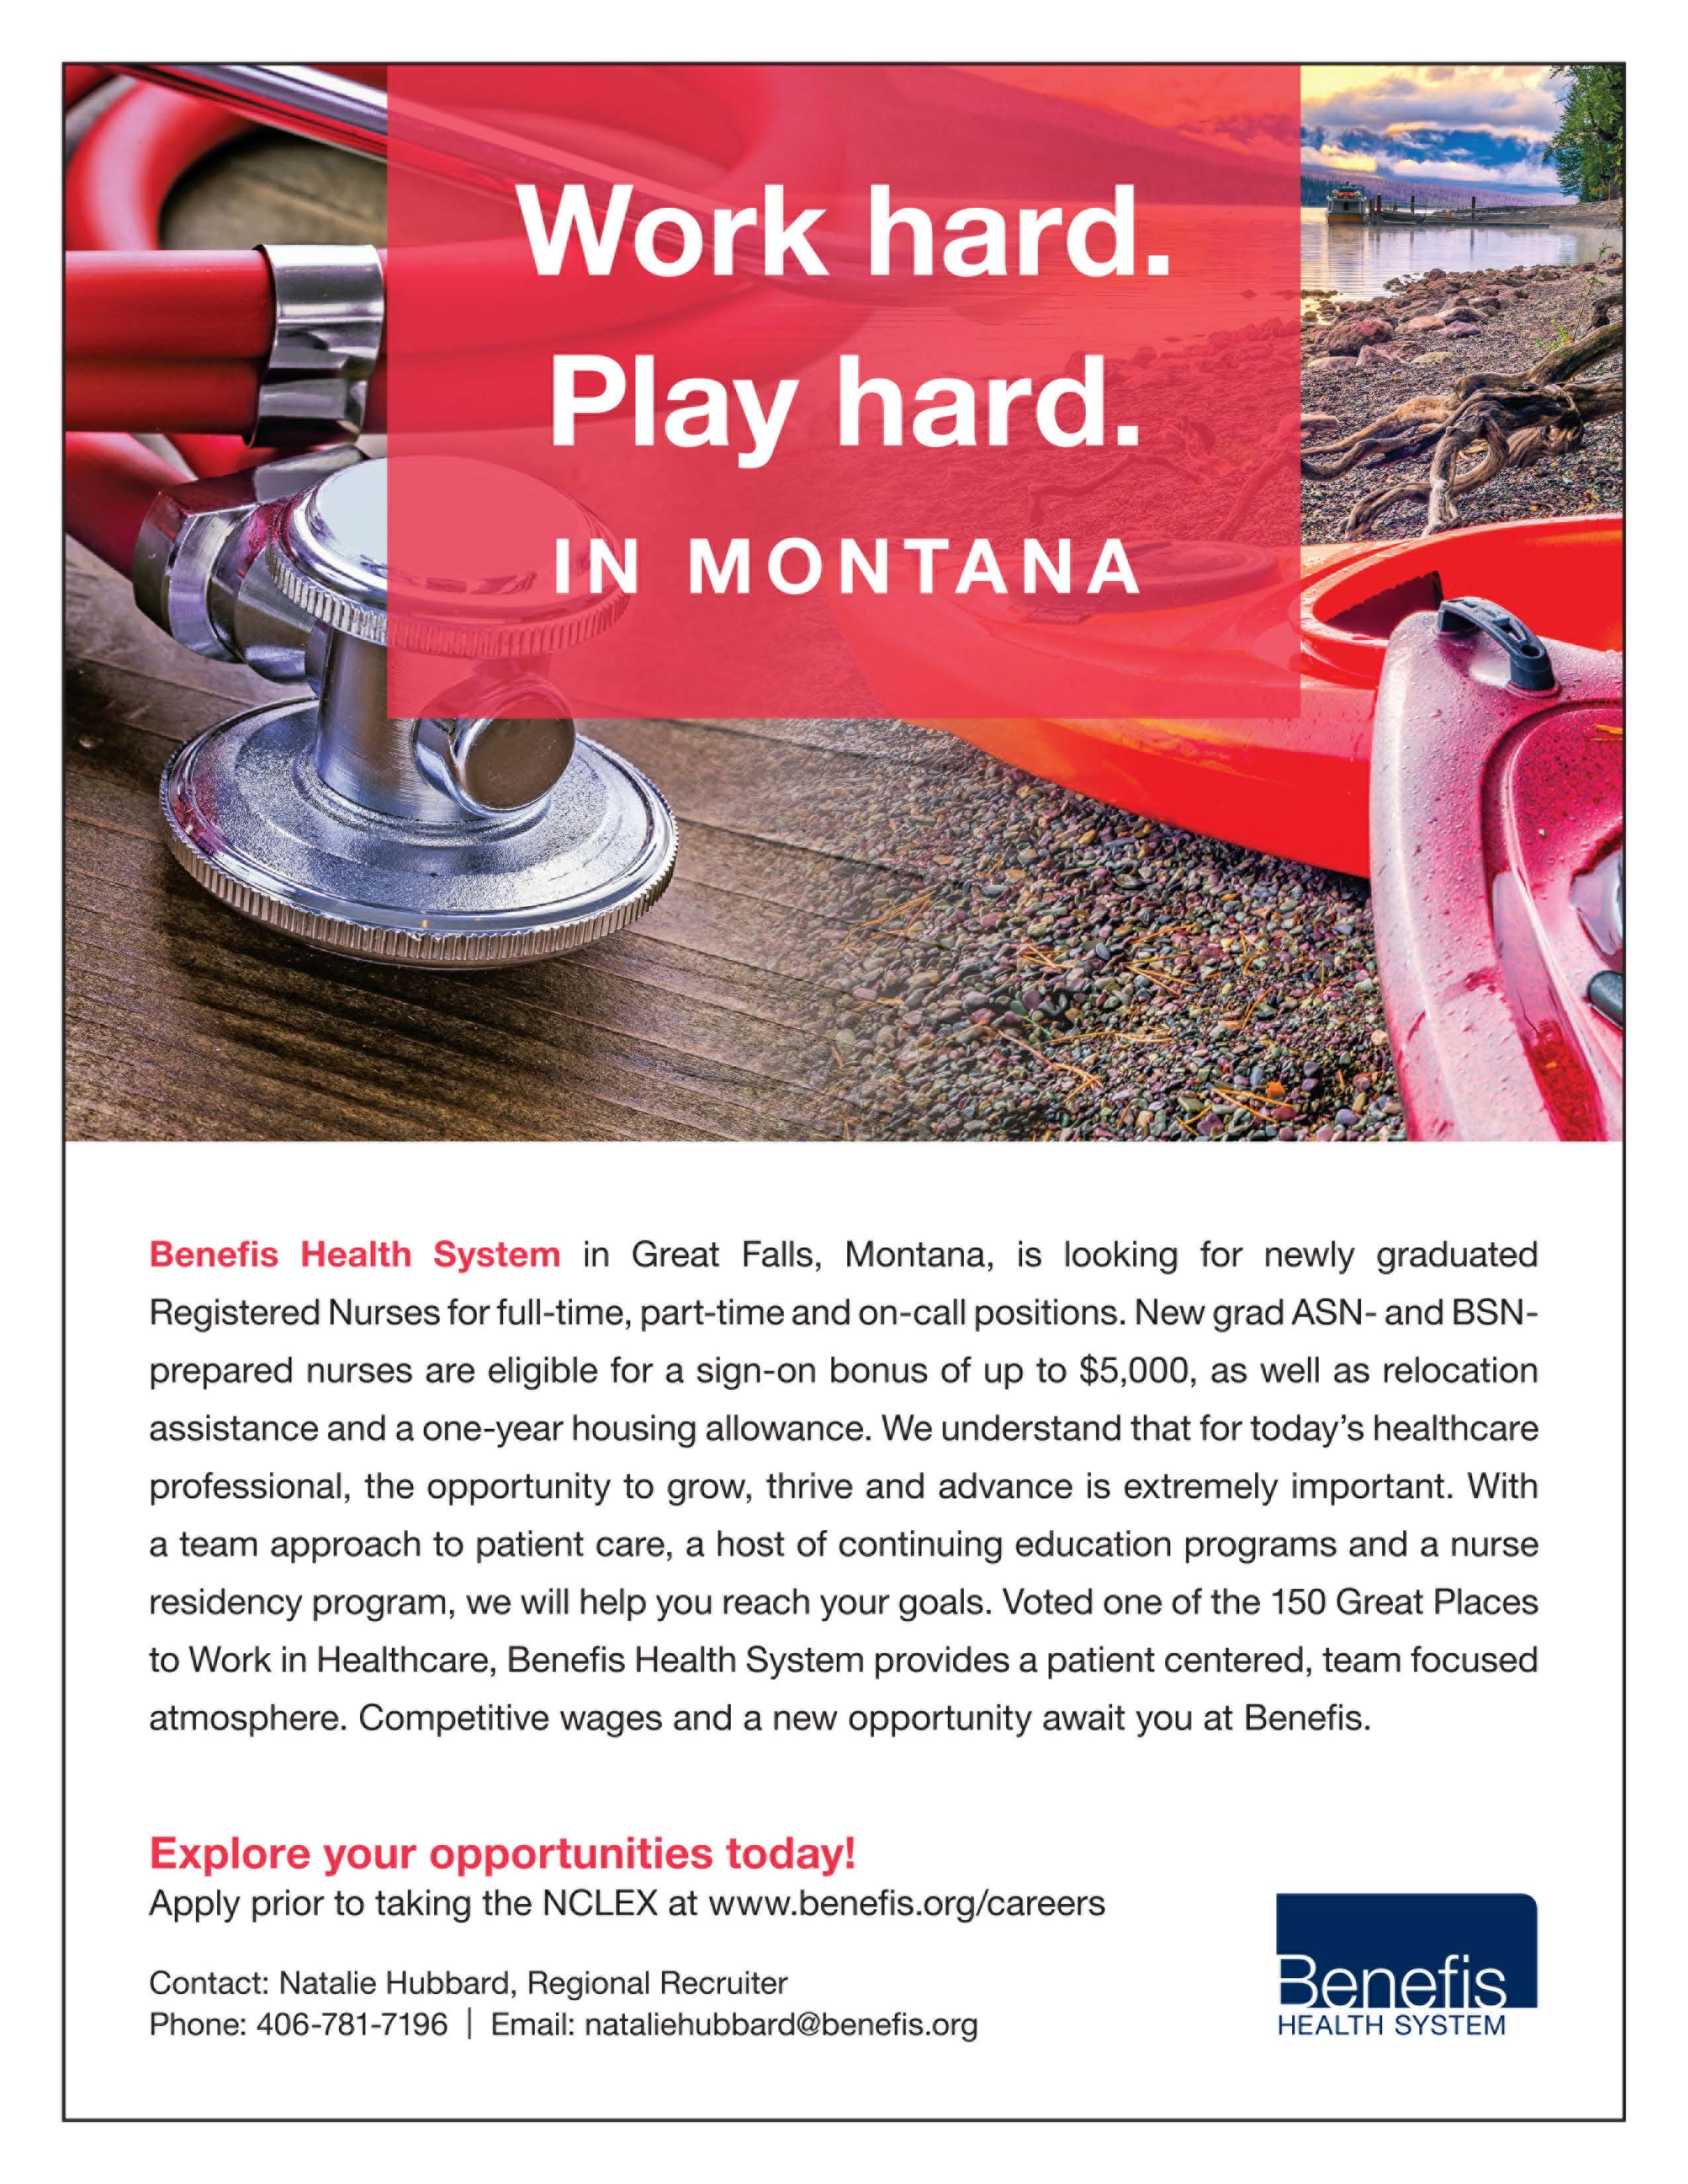 Work hard. Play hard. In Montana. Benefis Health System in Great Falls, Montana, is looking for newly graduated Registered Nurses for full-time, part-time, and on-call positions. New grad ASN- and BSN- prepared nurses are elible for a sign-on bonus up to $6,000, as well as relocation assistance and a one-year housing allowance. We understand that for today's healthcare professional, the opportunity to grow, thrive and advance is extremely important. With a team approach to patient care, a host of continuing education programs and a nurse residency program, we will help you reach your goals. Voted one of the 150 Great Places to work in Healthcare, Benefis Health System provides a patient centered, team focused atmosphere. Competitive wages and a new opportunity await you at Benefis. Explore your opportunities today! Apply prior to taking the NCLEX at www.benefis.org/careers Contact: Natalie Hubbard, Regional Recruiter Phone: 406-781-7196 Email: nataliehubbard@benefis.org